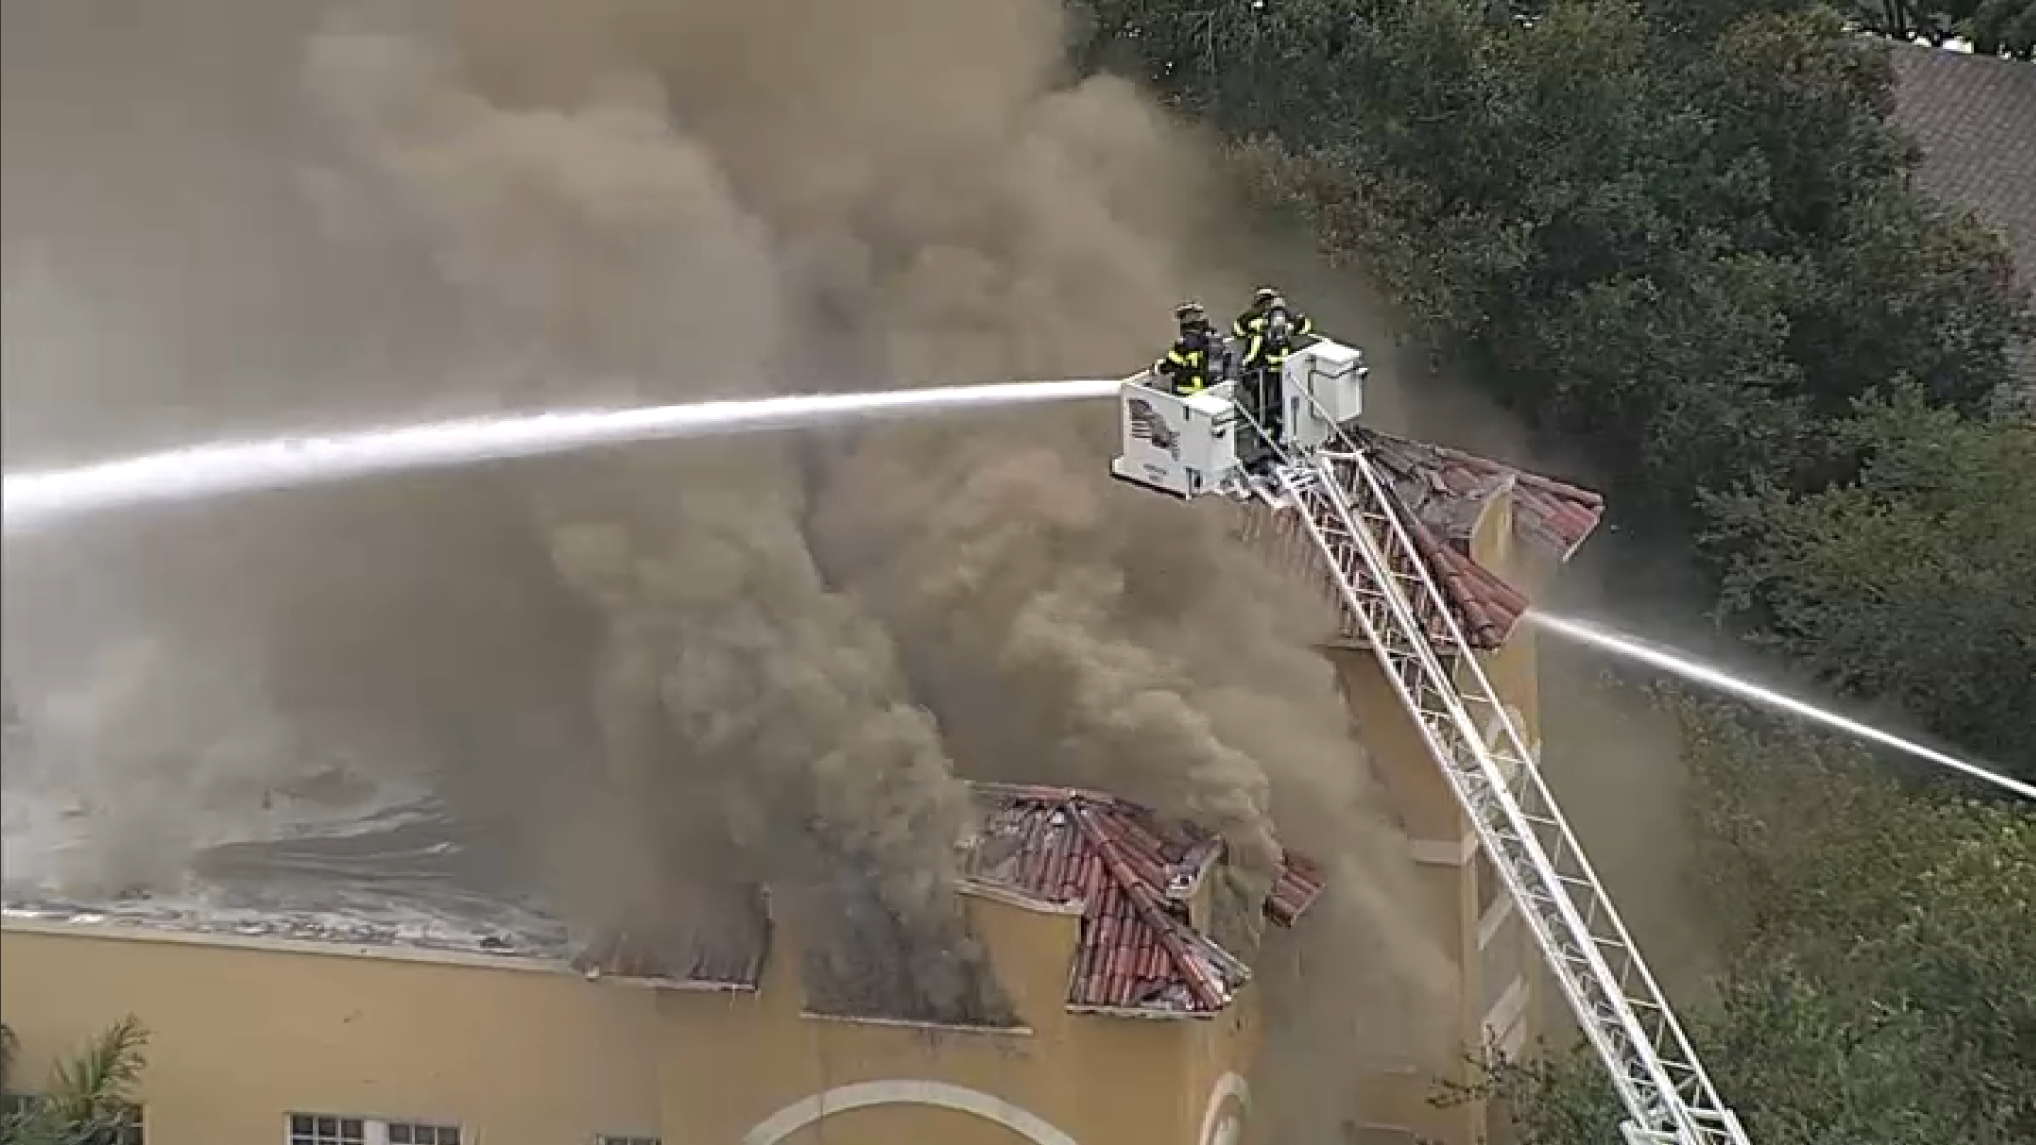 PICTURES: Massive fire at apartment building in Miami